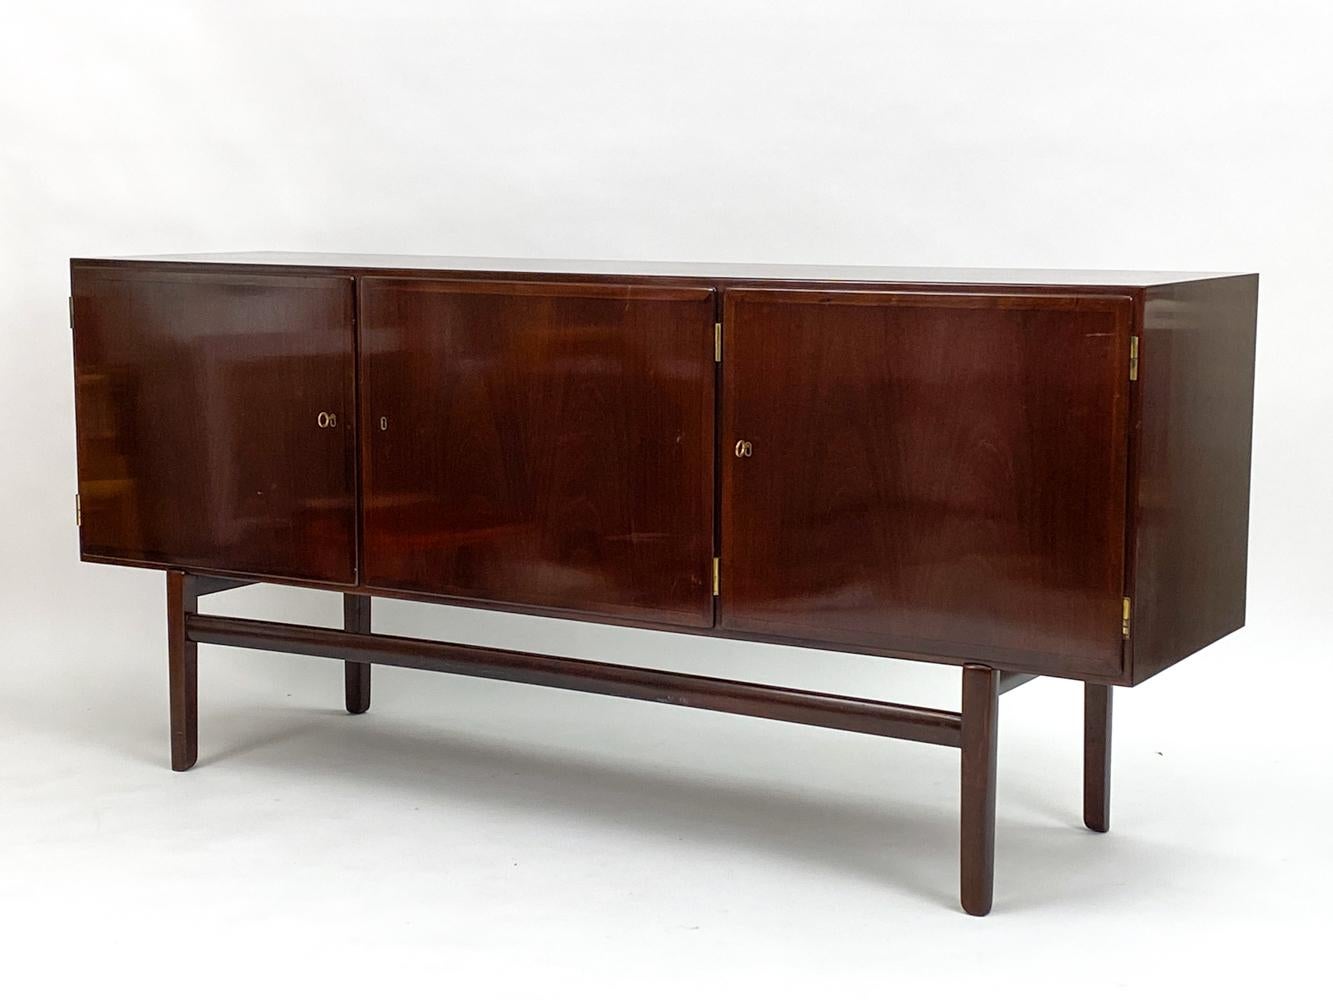 An iconic piece of Danish design history, the Rungstedlund sideboard by Ole Wanscher is timeless in its exquisite luxury and minimalist silhouette. Produced by Poul Jeppesens Furniture in St Heddinge, Denmark, during the 1960's and 1970's, the